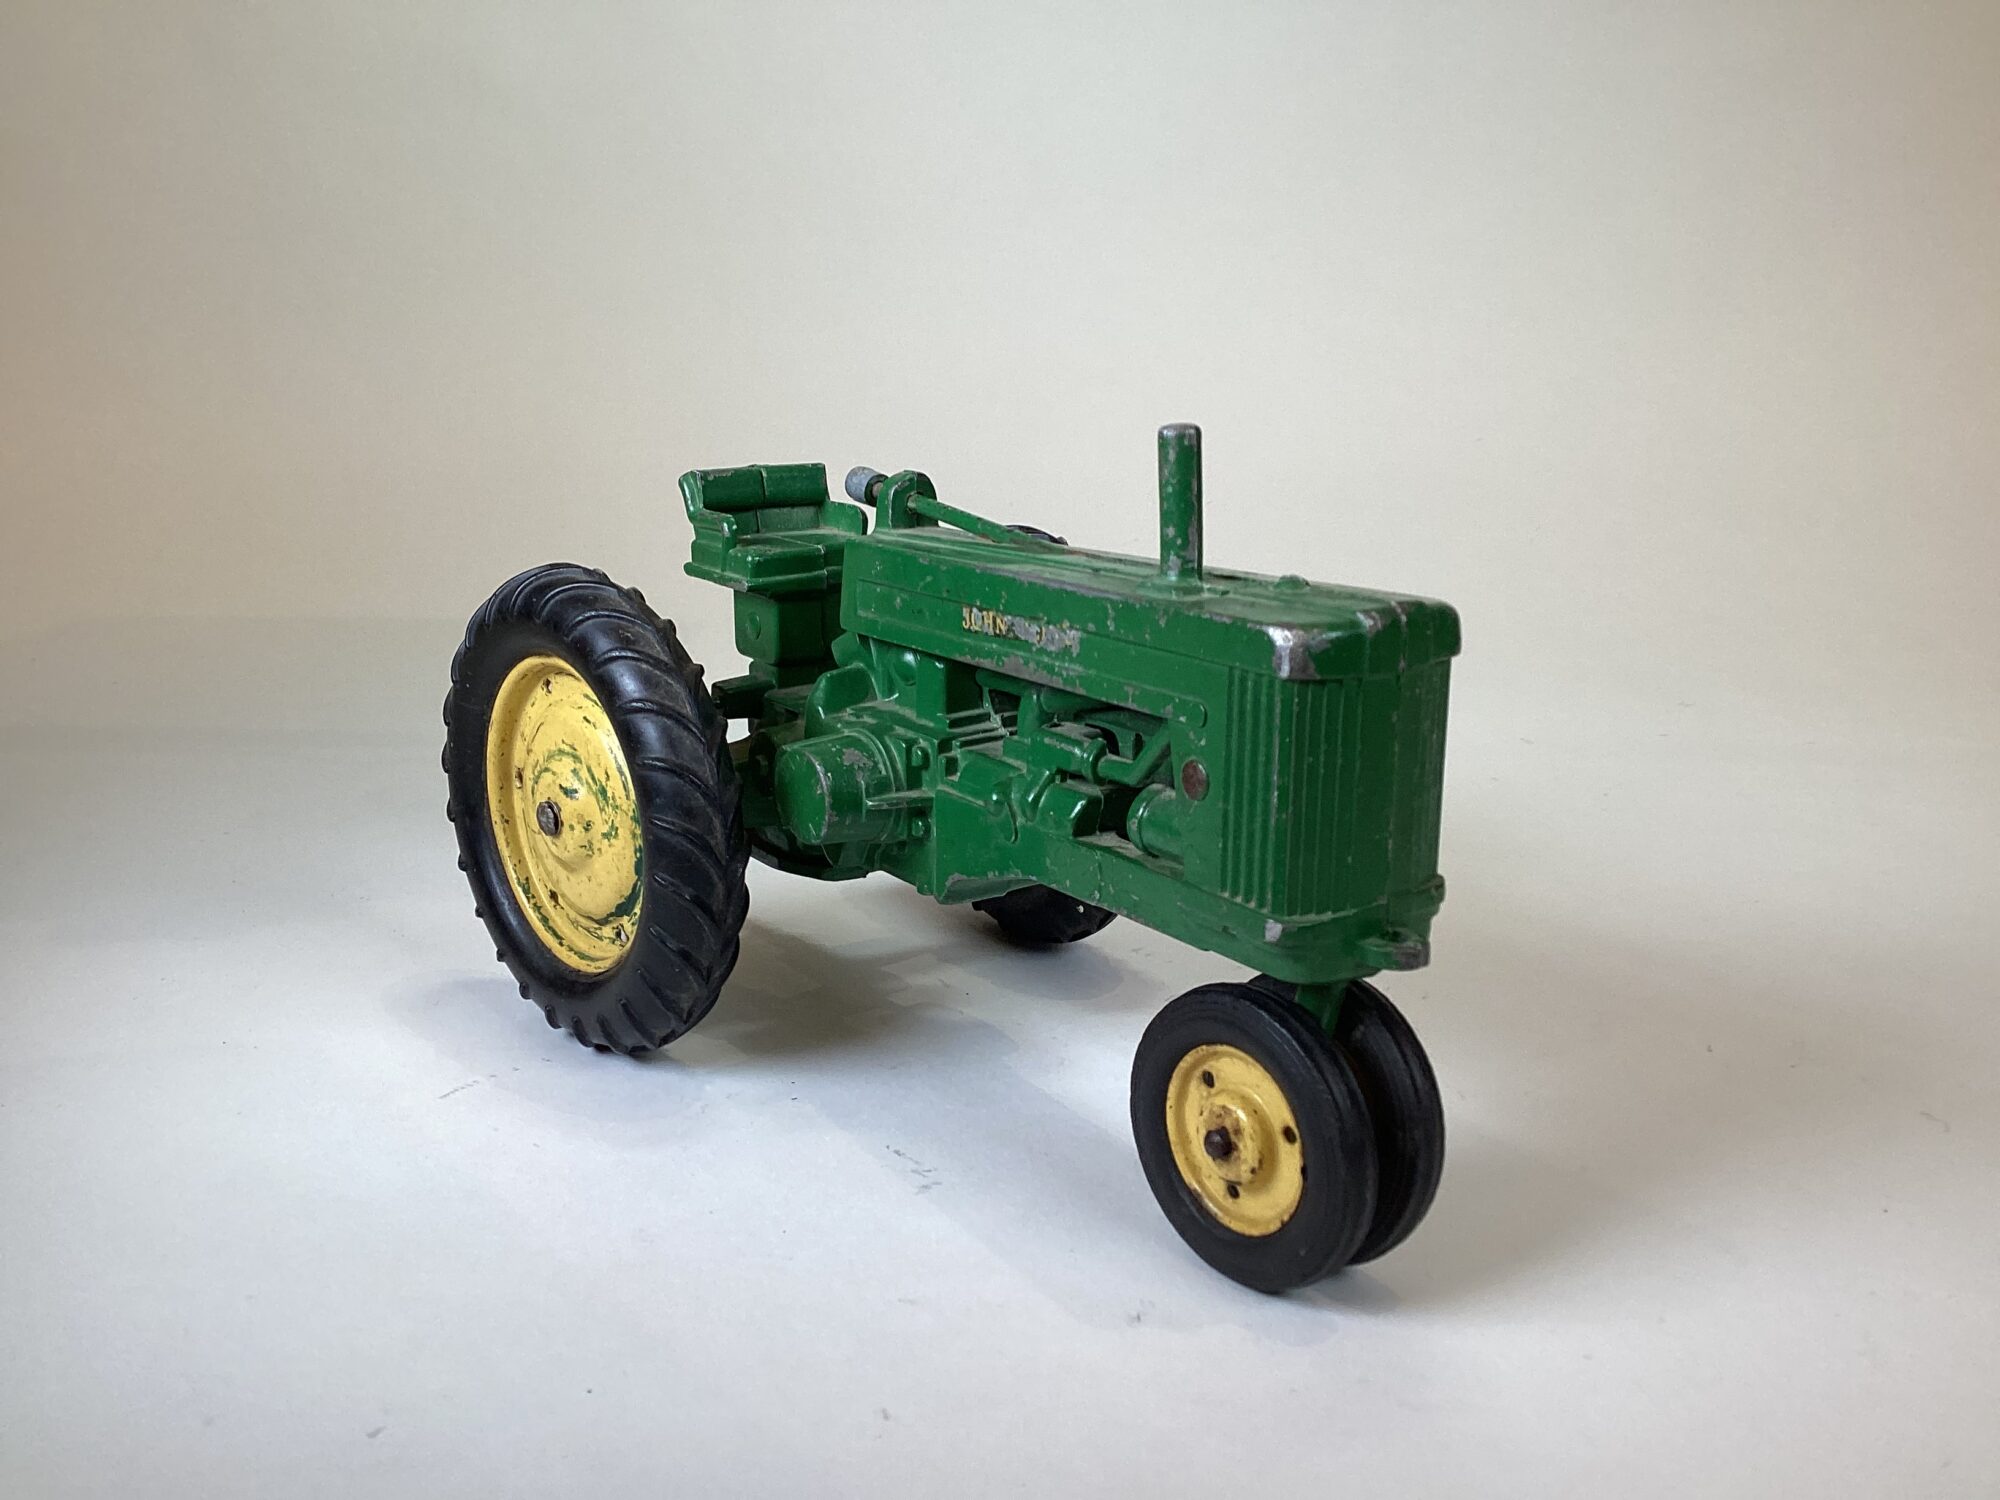 Photo of a small model of a green tractor.